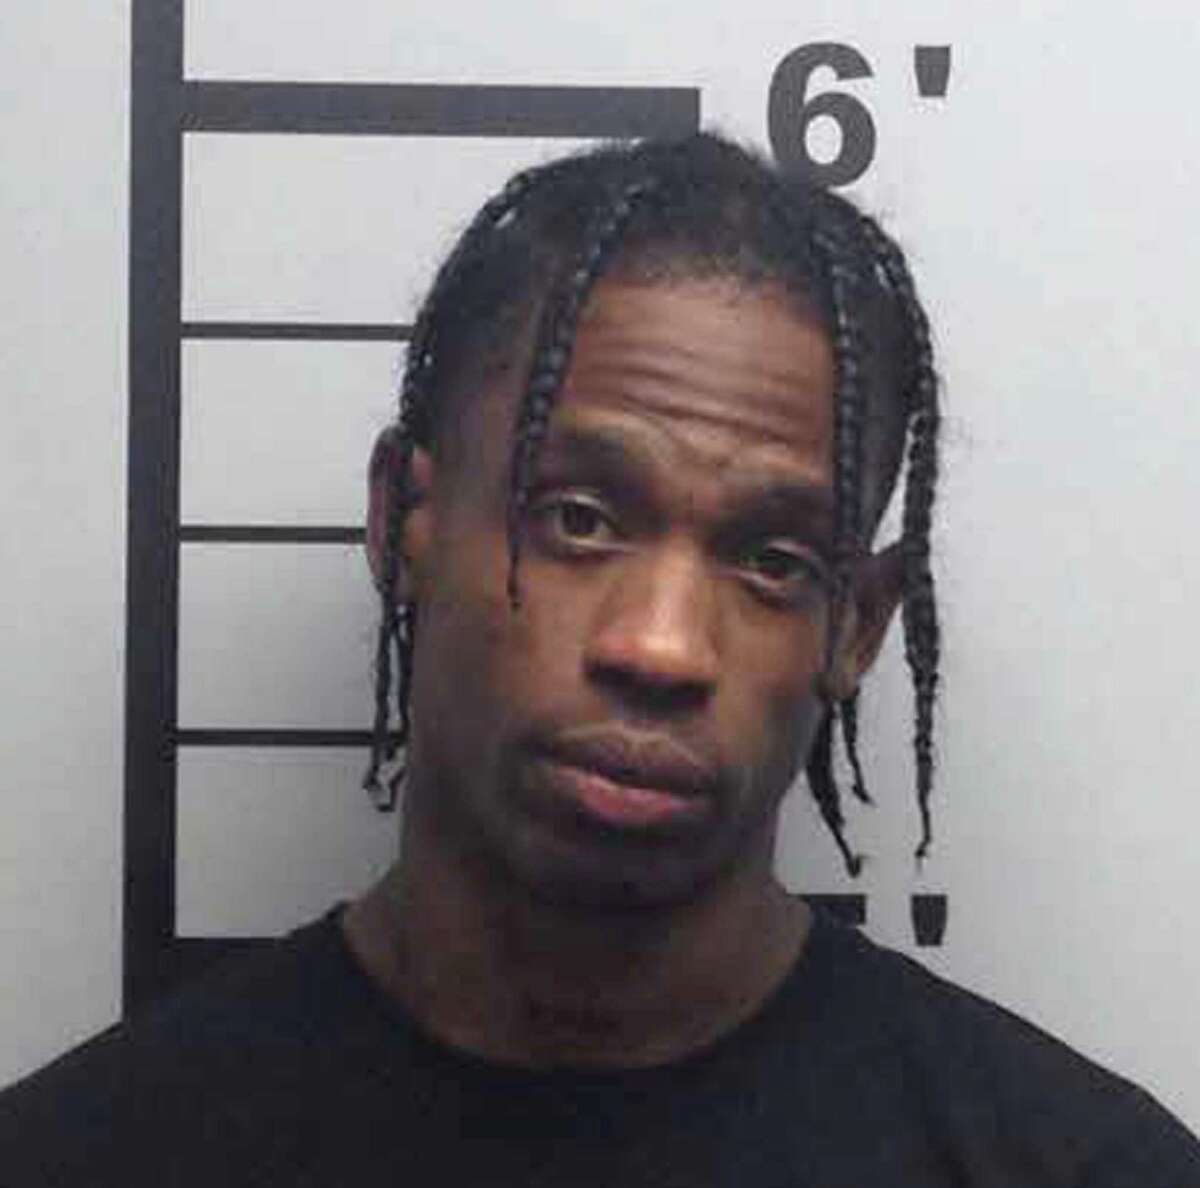 Travis Scott This undated photo provided by the Benton County Sheriff's Office in Bentonville Ark., shows the wrapper, whose real name is Jacques Webster, after he was arrested on May 13, 2017, on charges of inciting a riot, disorderly conduct and endangering the welfare of a minor.  (Benton County Sheriff's Office via AP)